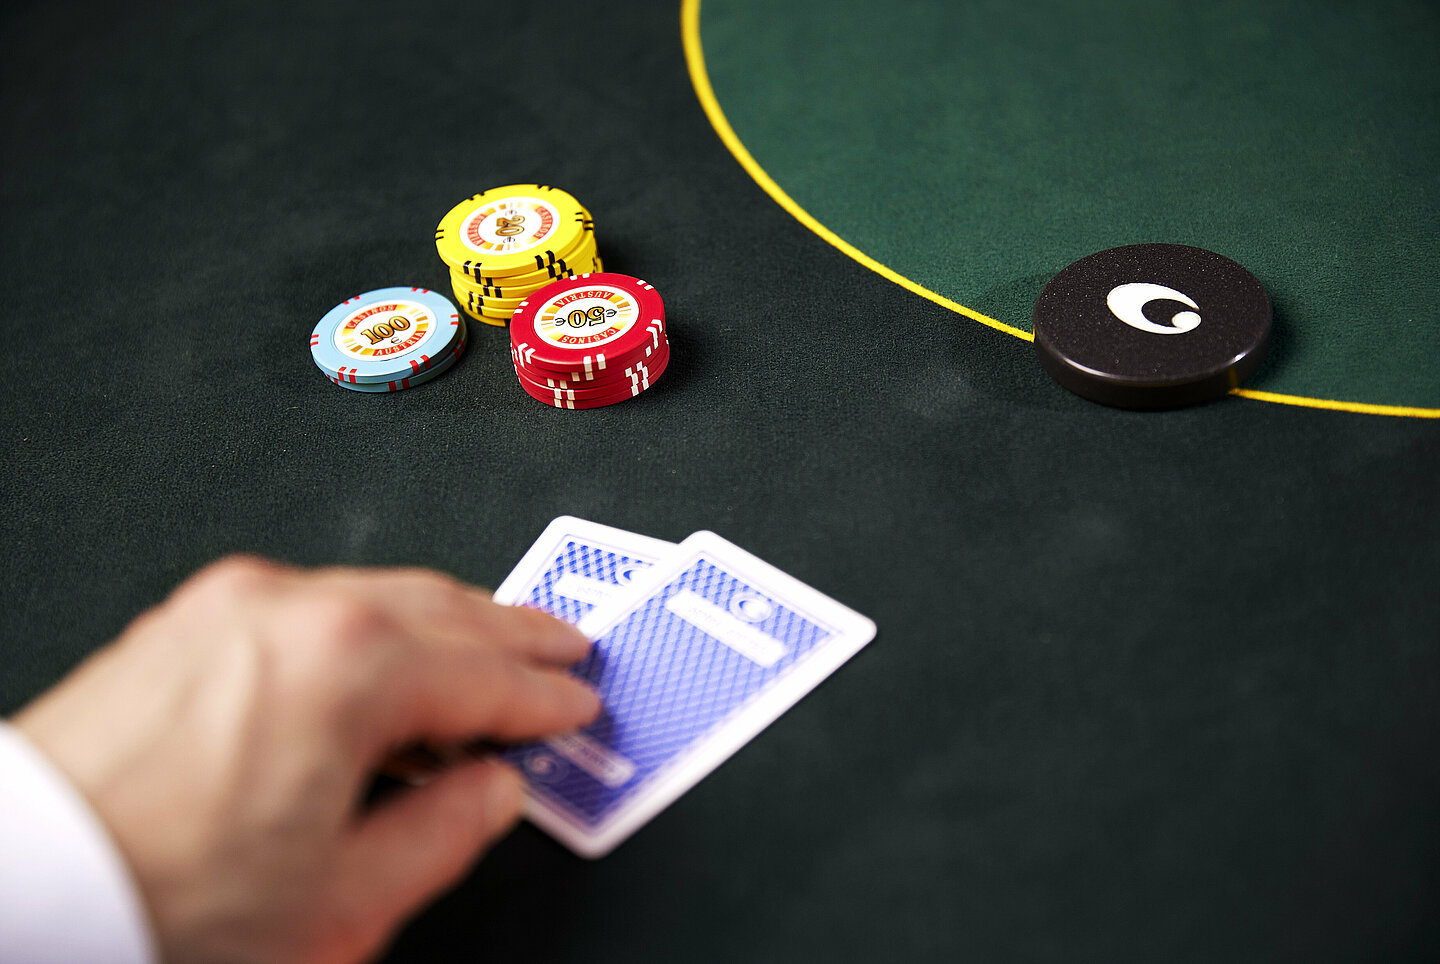 Poker cards face down with dealer button